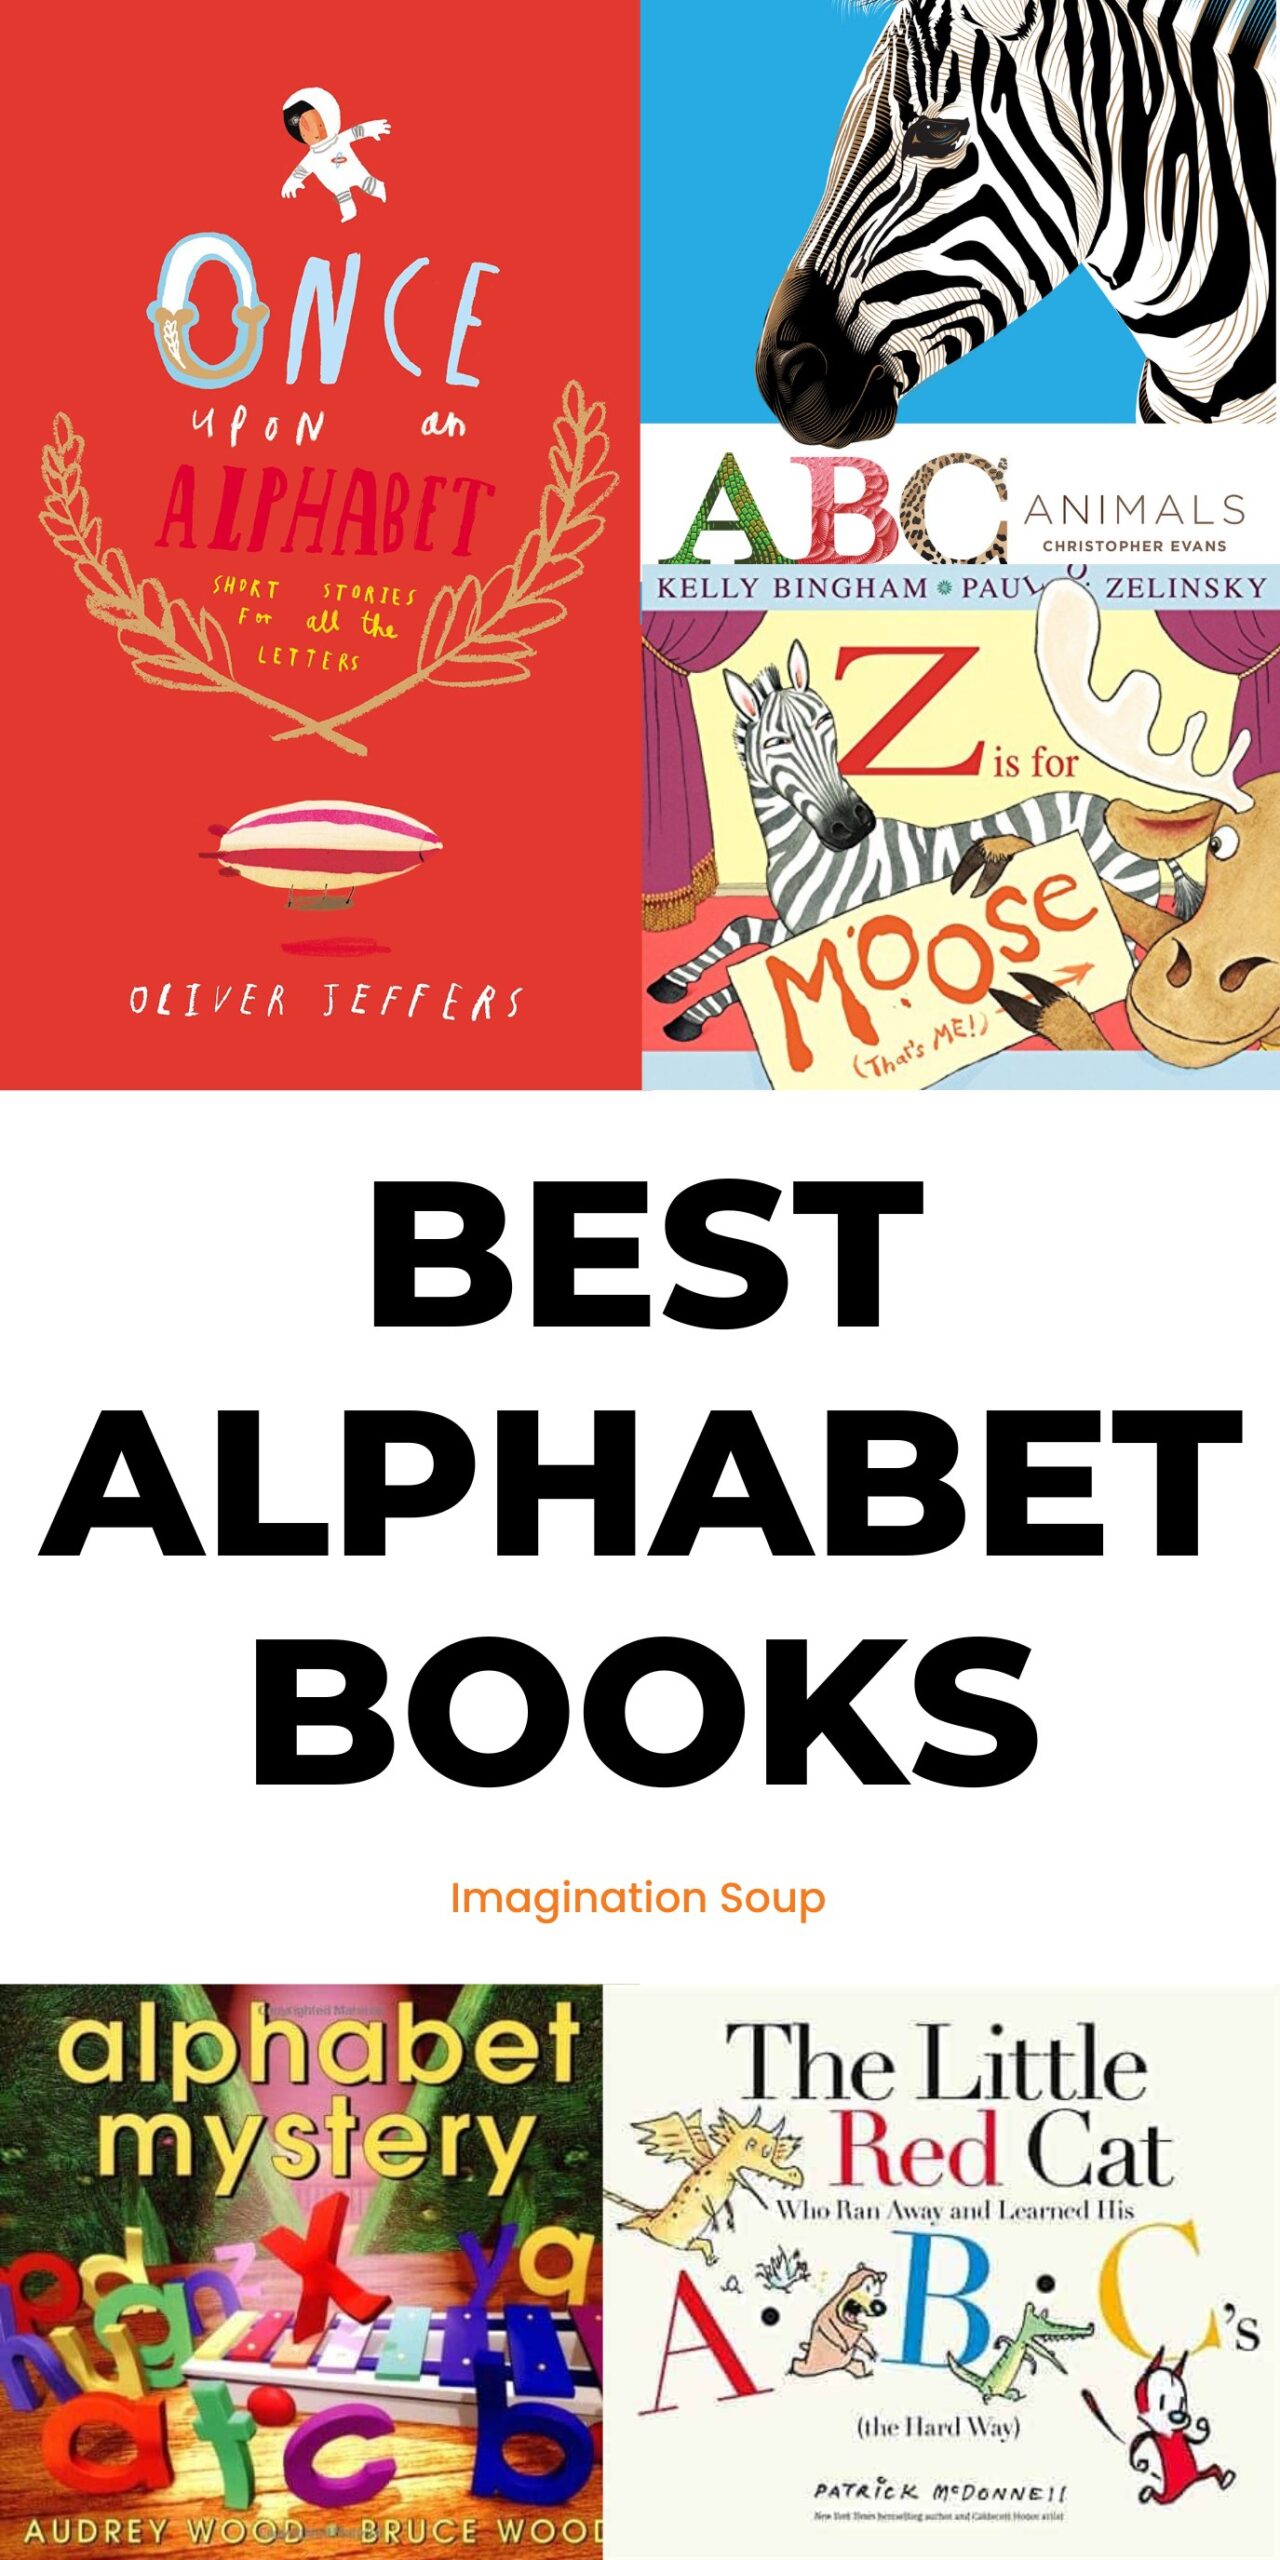 Find the best alphabet picture books for kids that aren't just for babies and toddlers, they are also for preschoolers and early and upper elementary children. In fact, a good alphabet book is great for many ages because it teaches the alphabet and letter sounds and builds vocabulary.